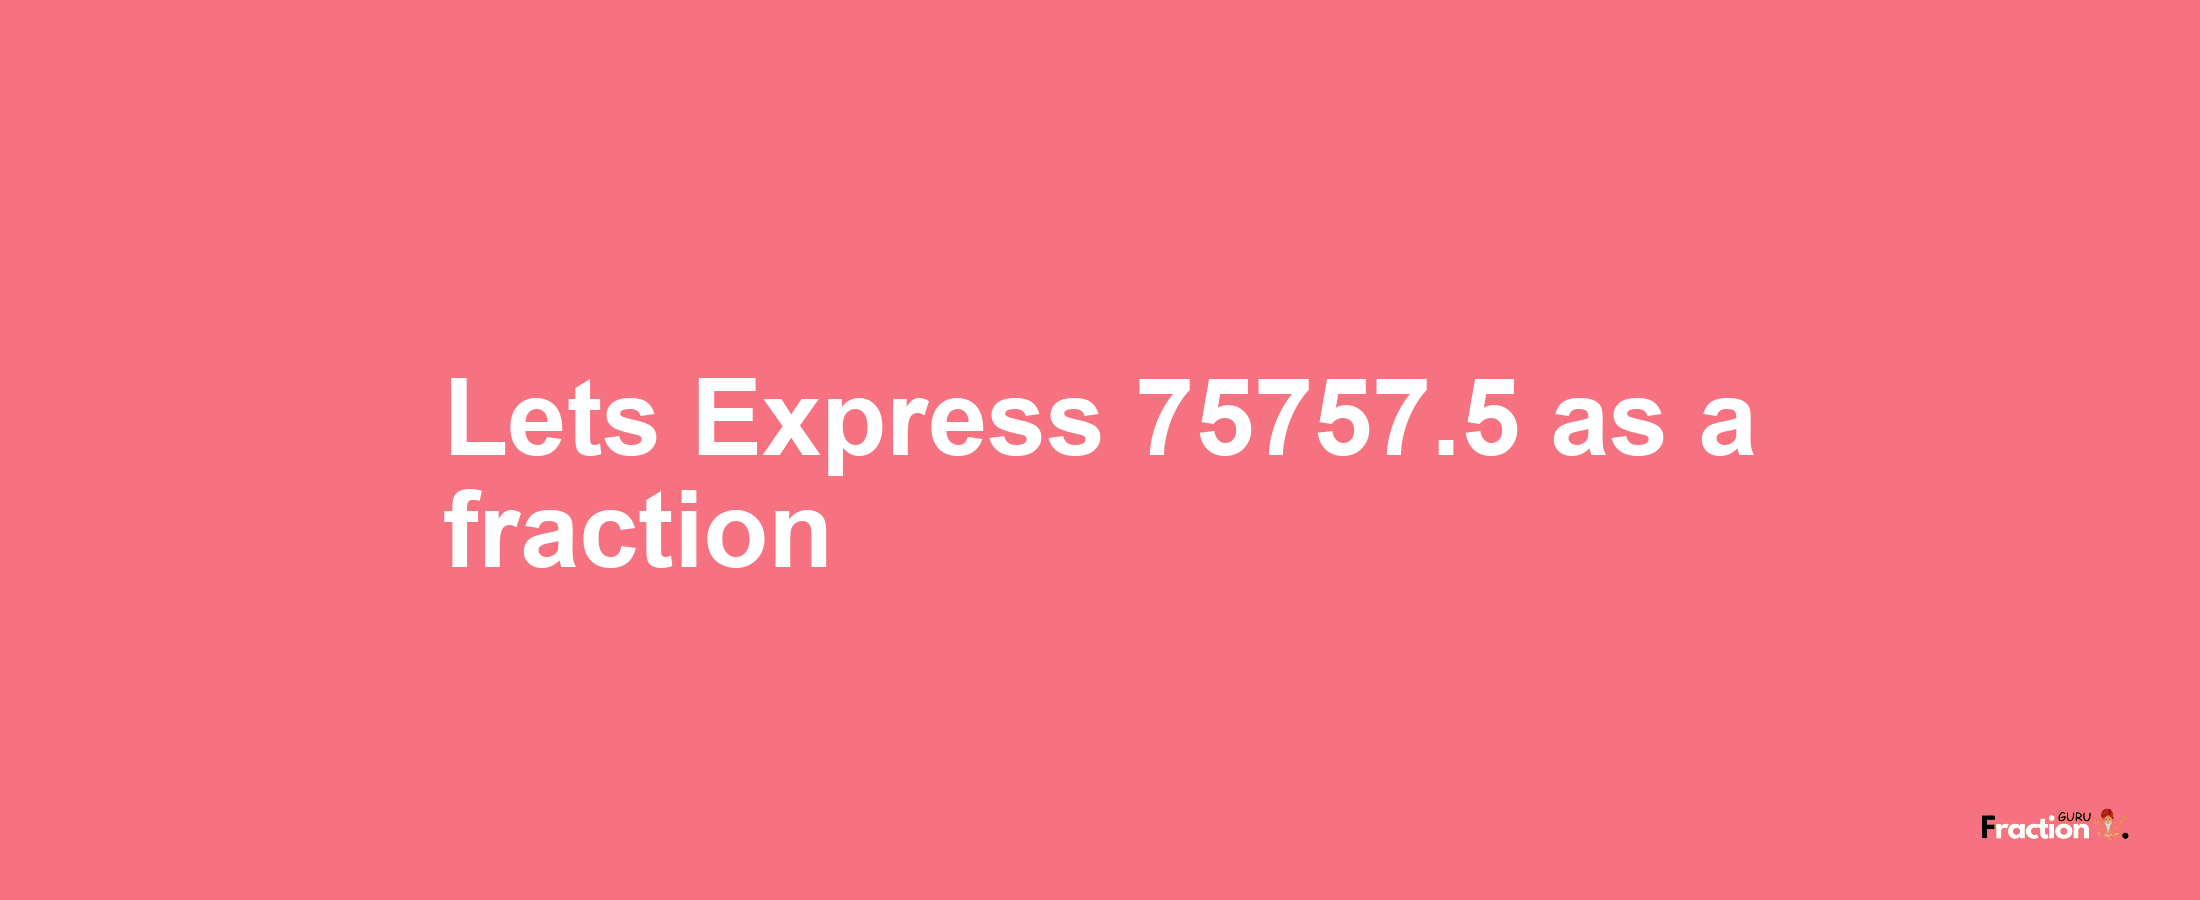 Lets Express 75757.5 as afraction